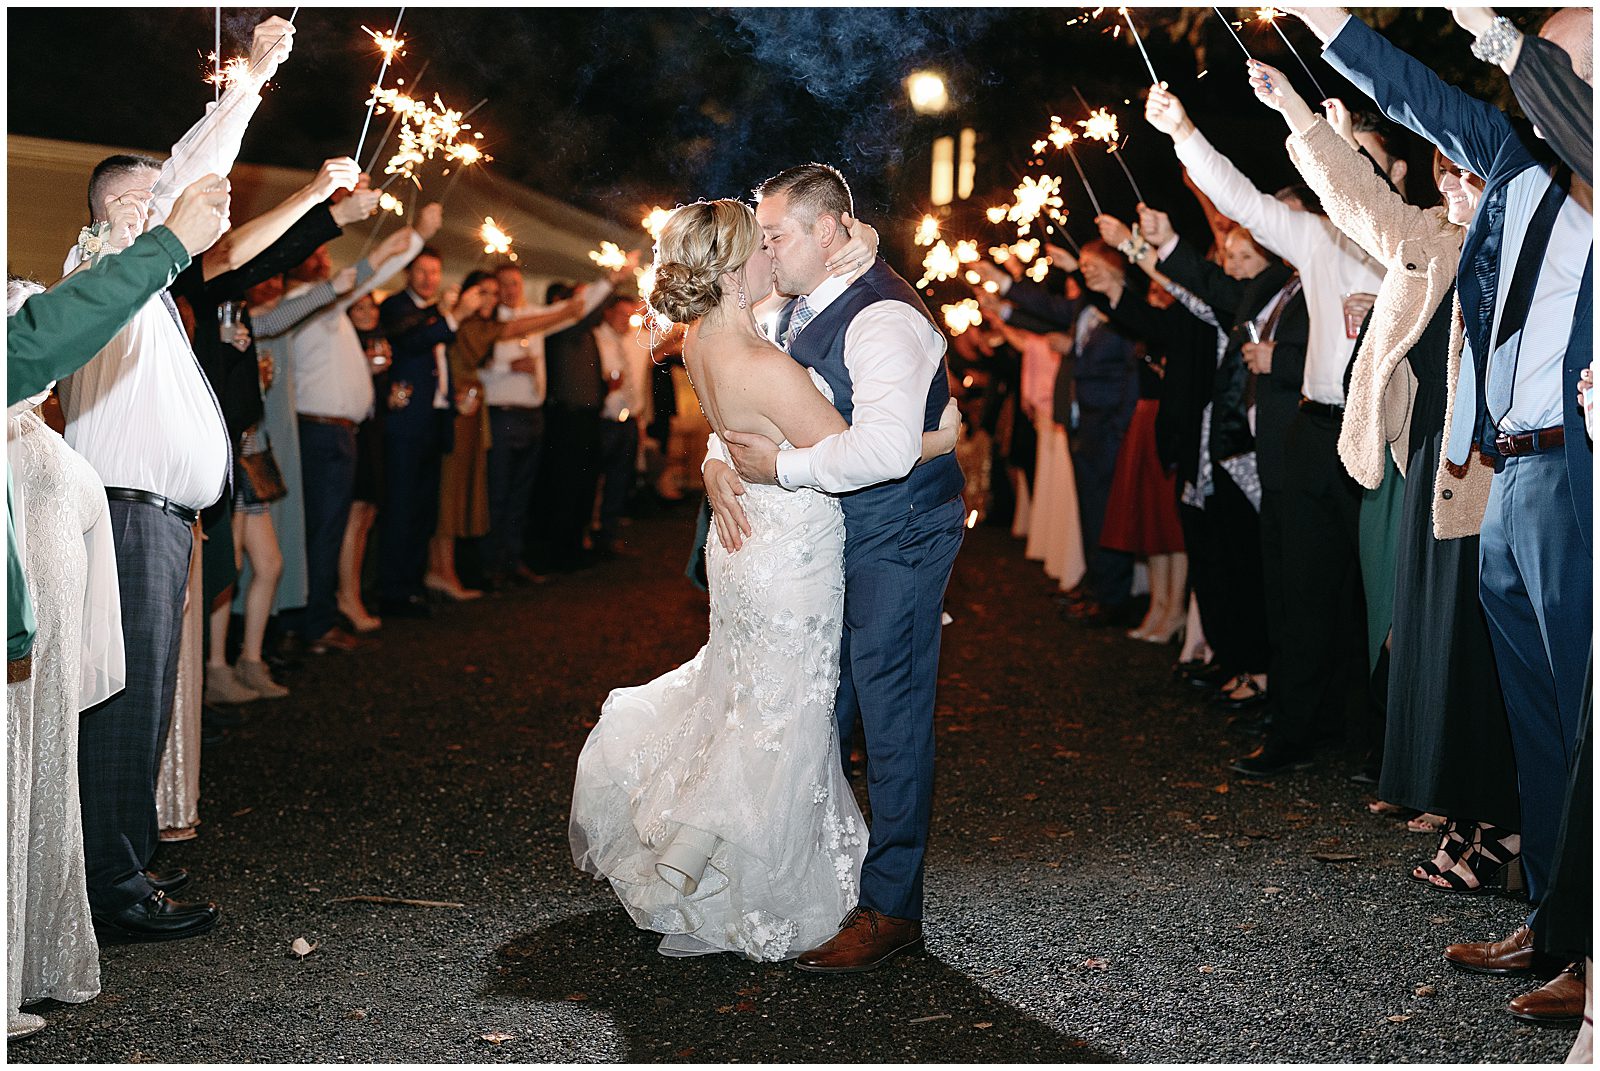 Fall Hawkesdene Wedding Sparkler Exit Bride and Groom Kissing Photo